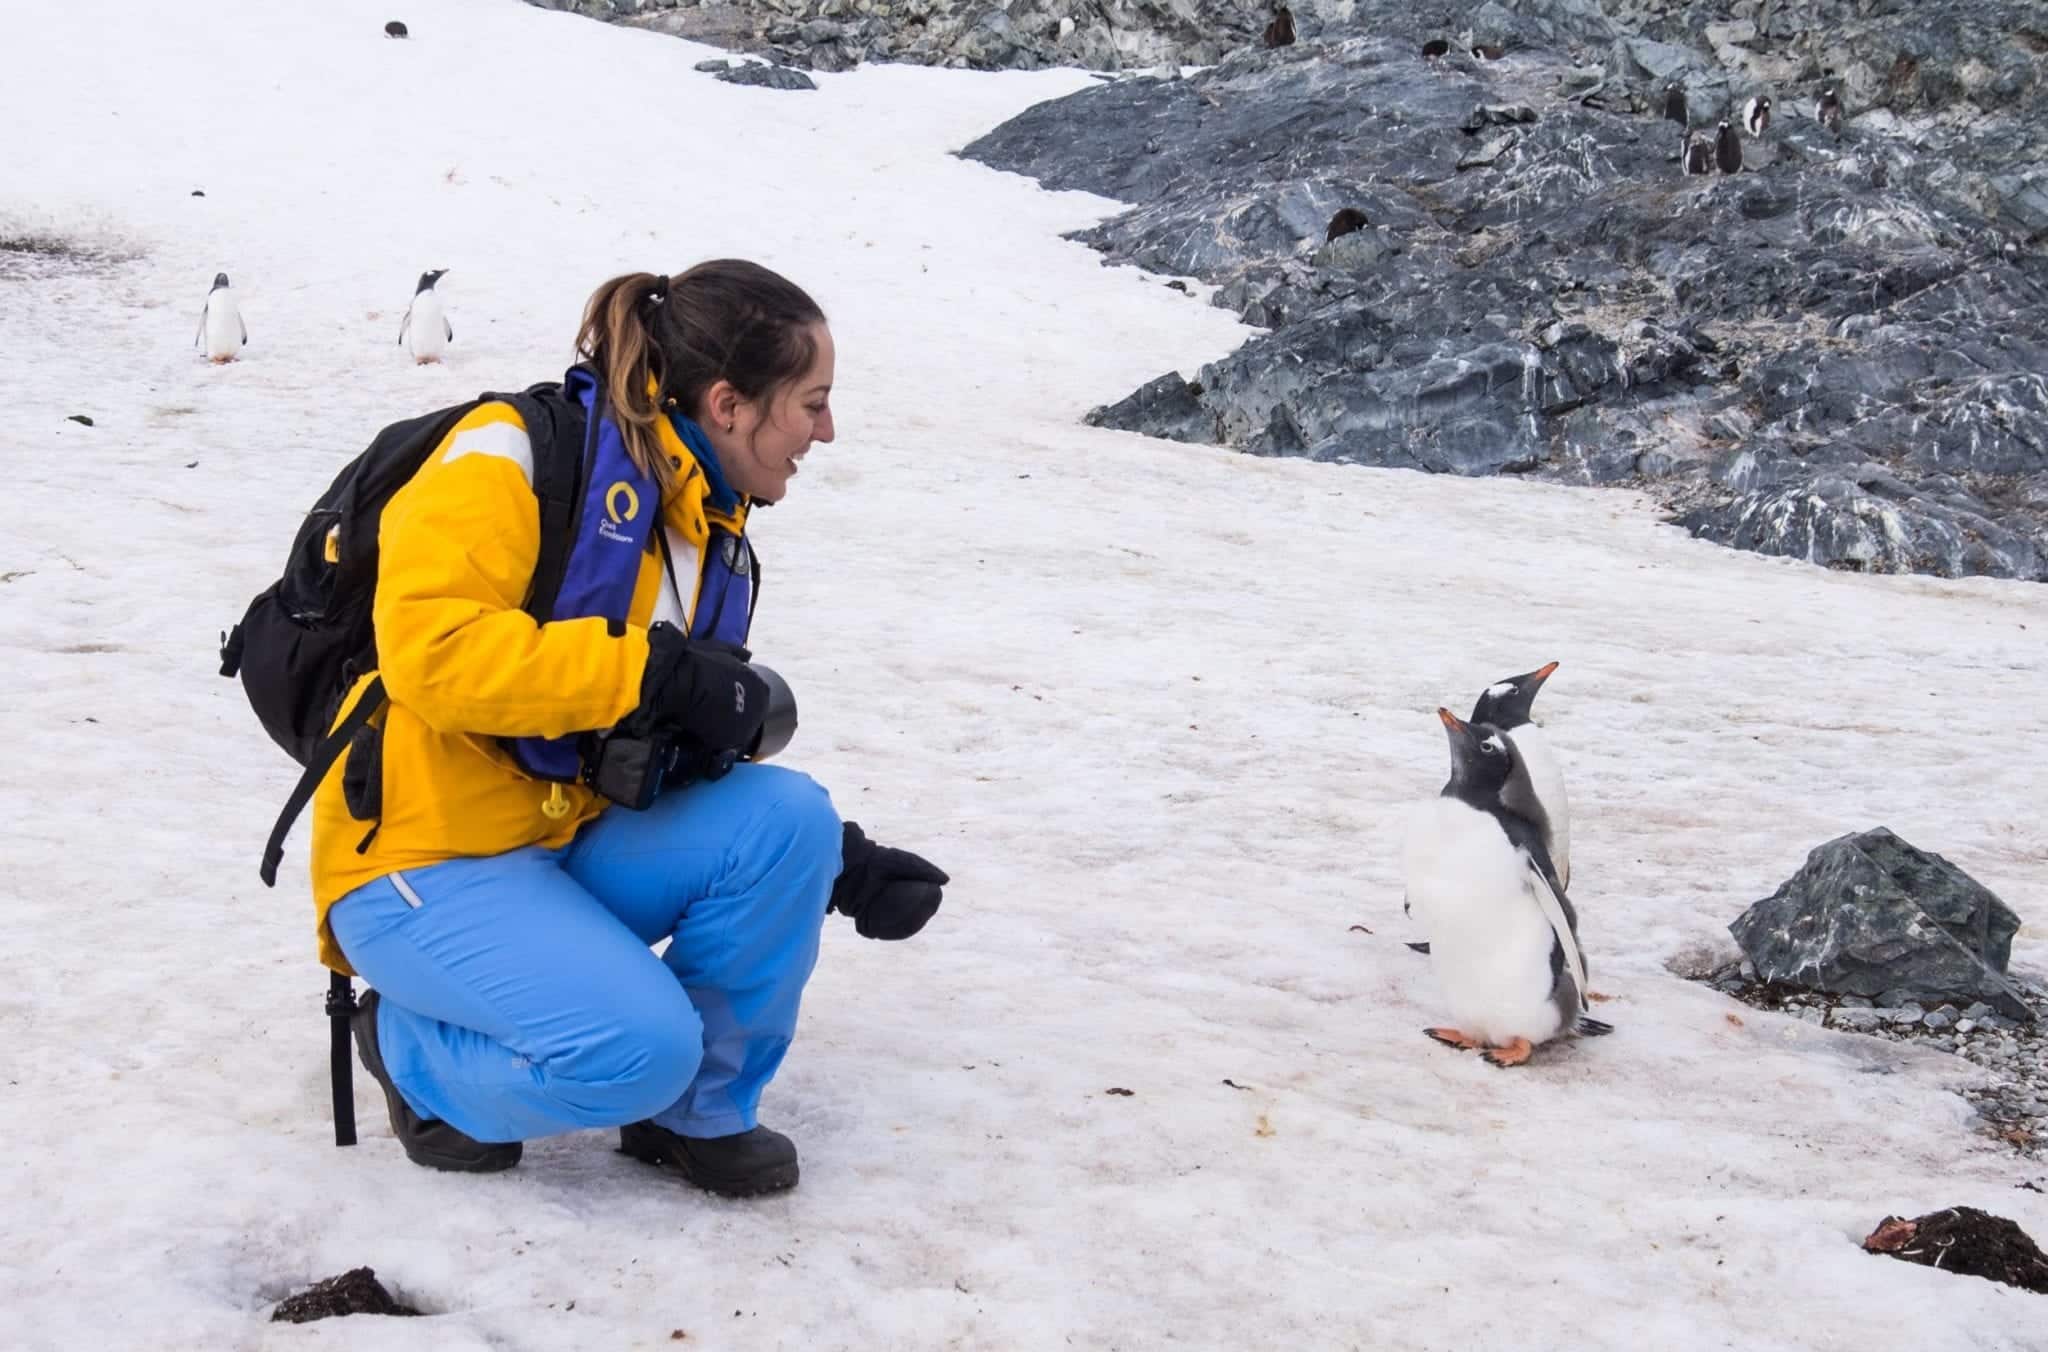 Kate crouching down on the snow in Antarctica, talking to two penguins, their beaks high in the air.